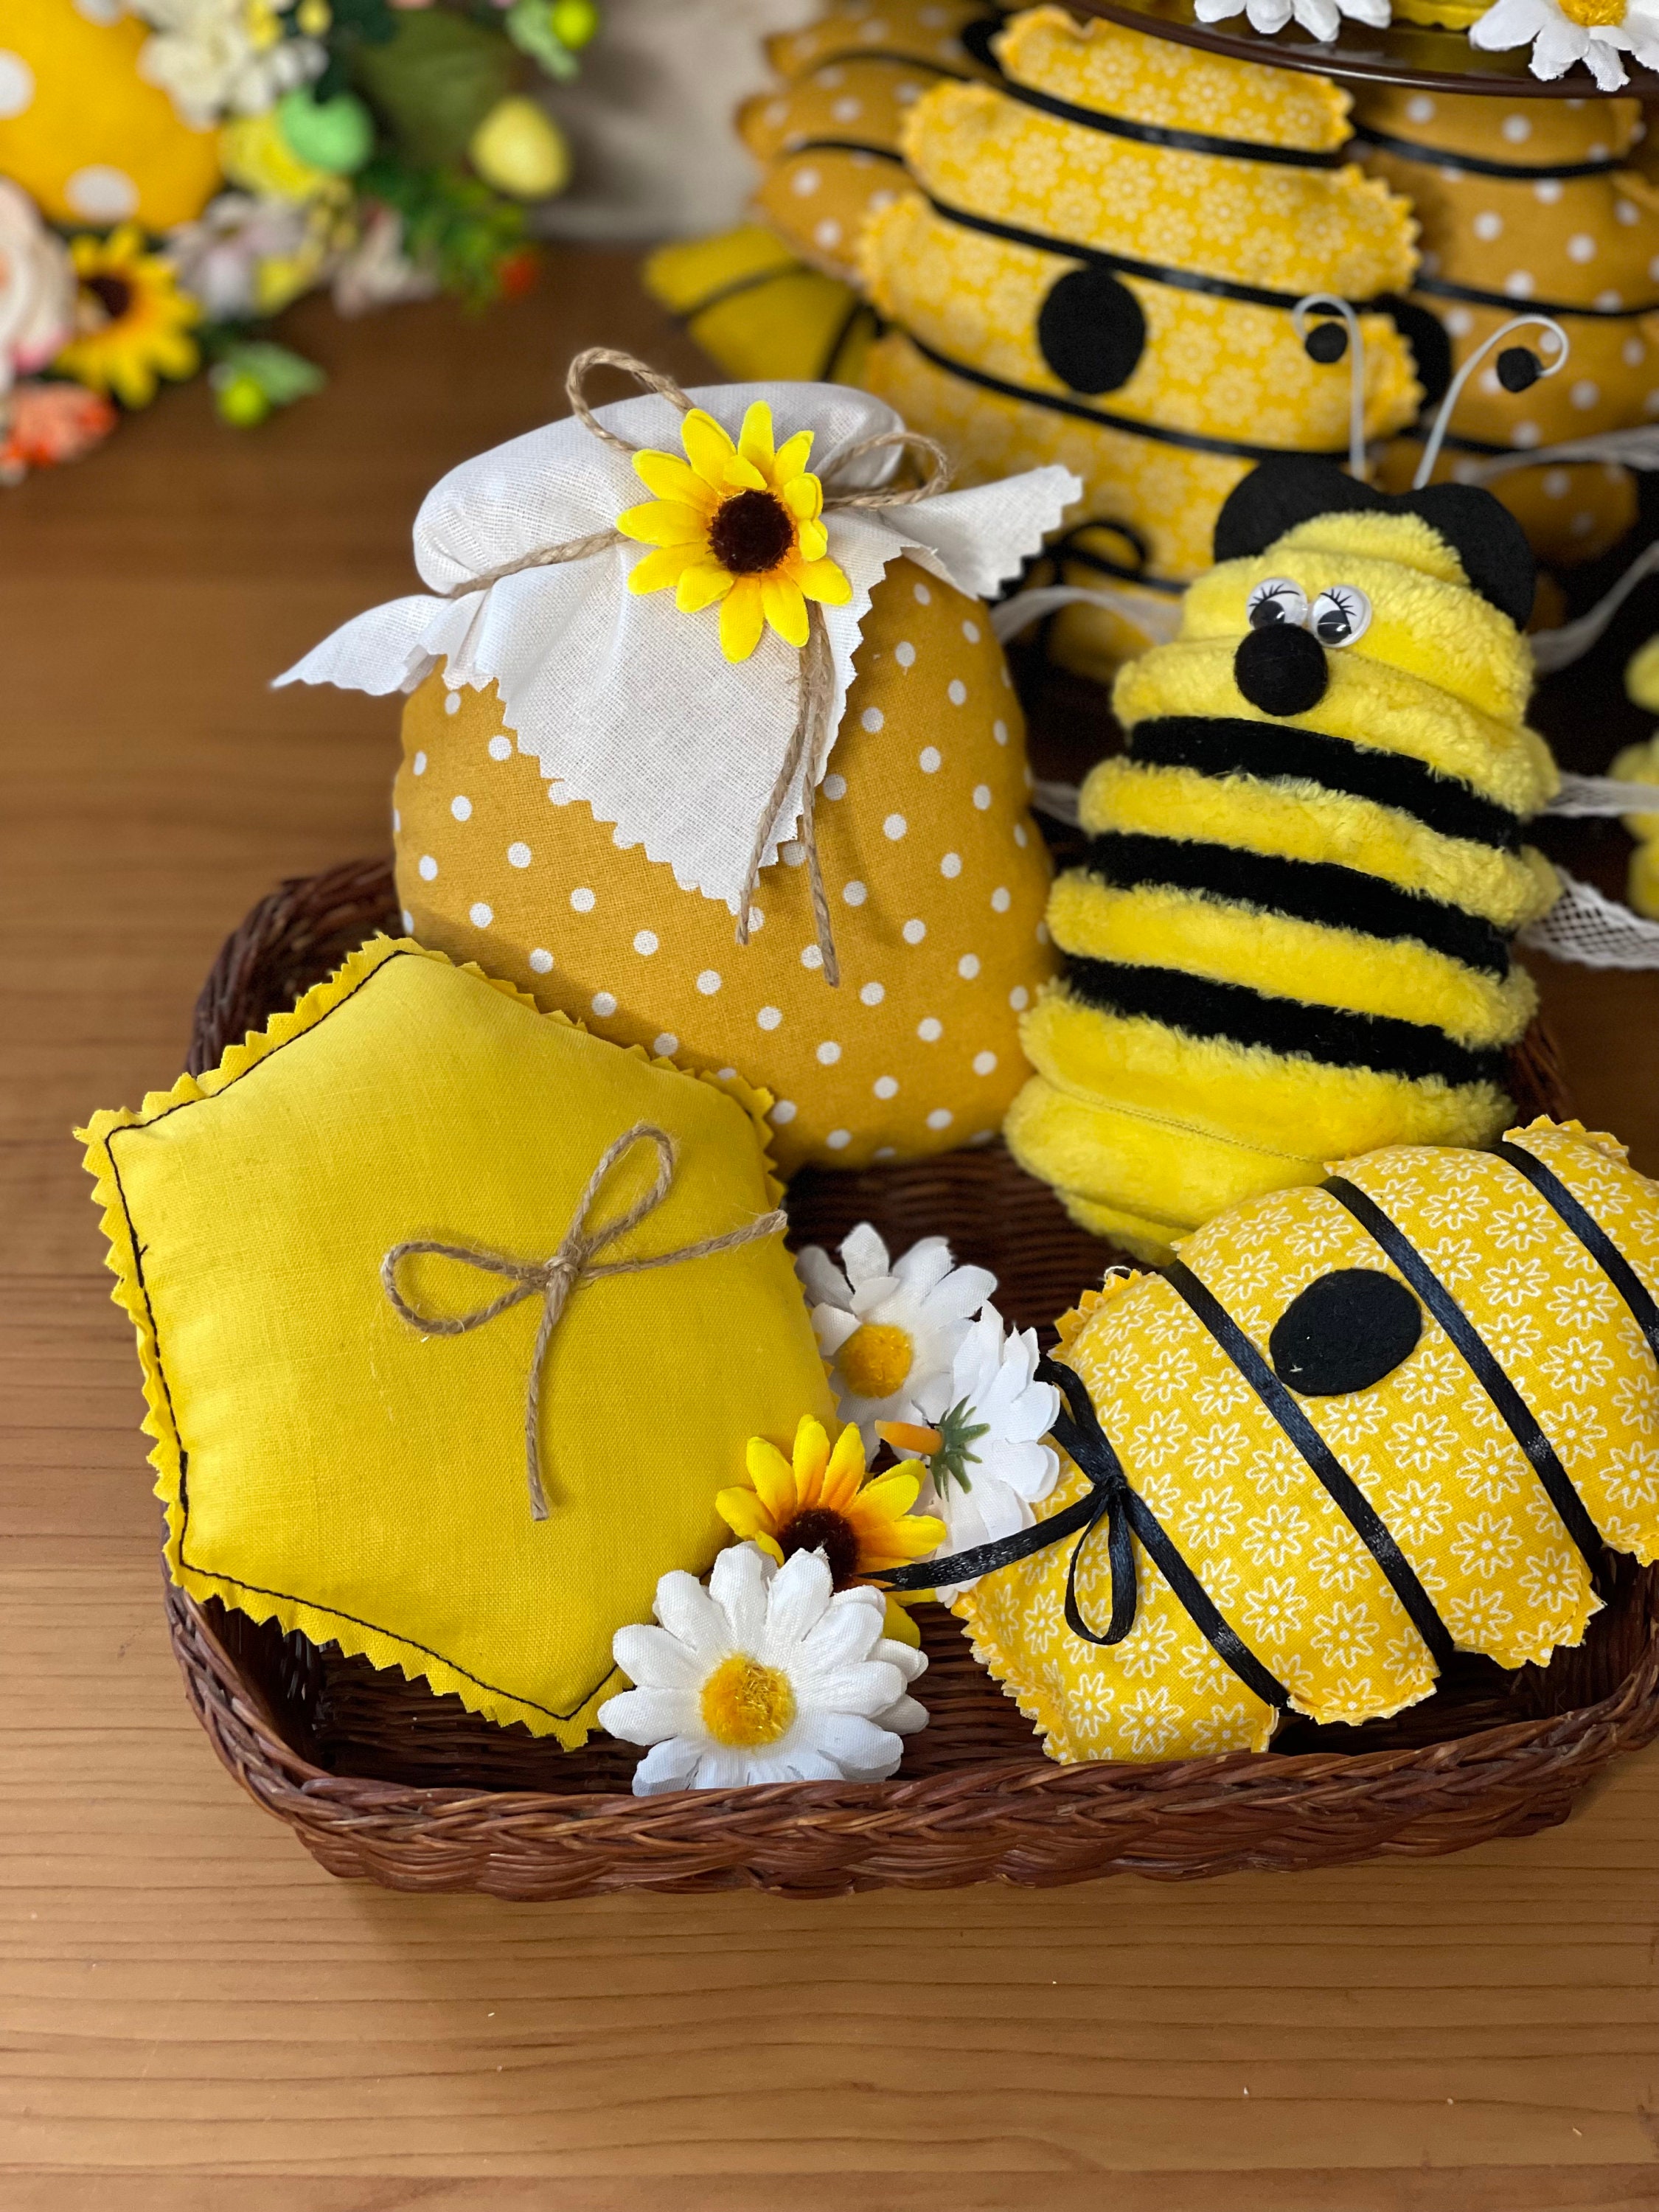 Honey Bee Decor for Kitchen Honey Comb Decor Bee Hive Fabric Honey Jar Bee  Decor for Home Summer Tiered Tray Yellow Decor Bee Tiered Tray 